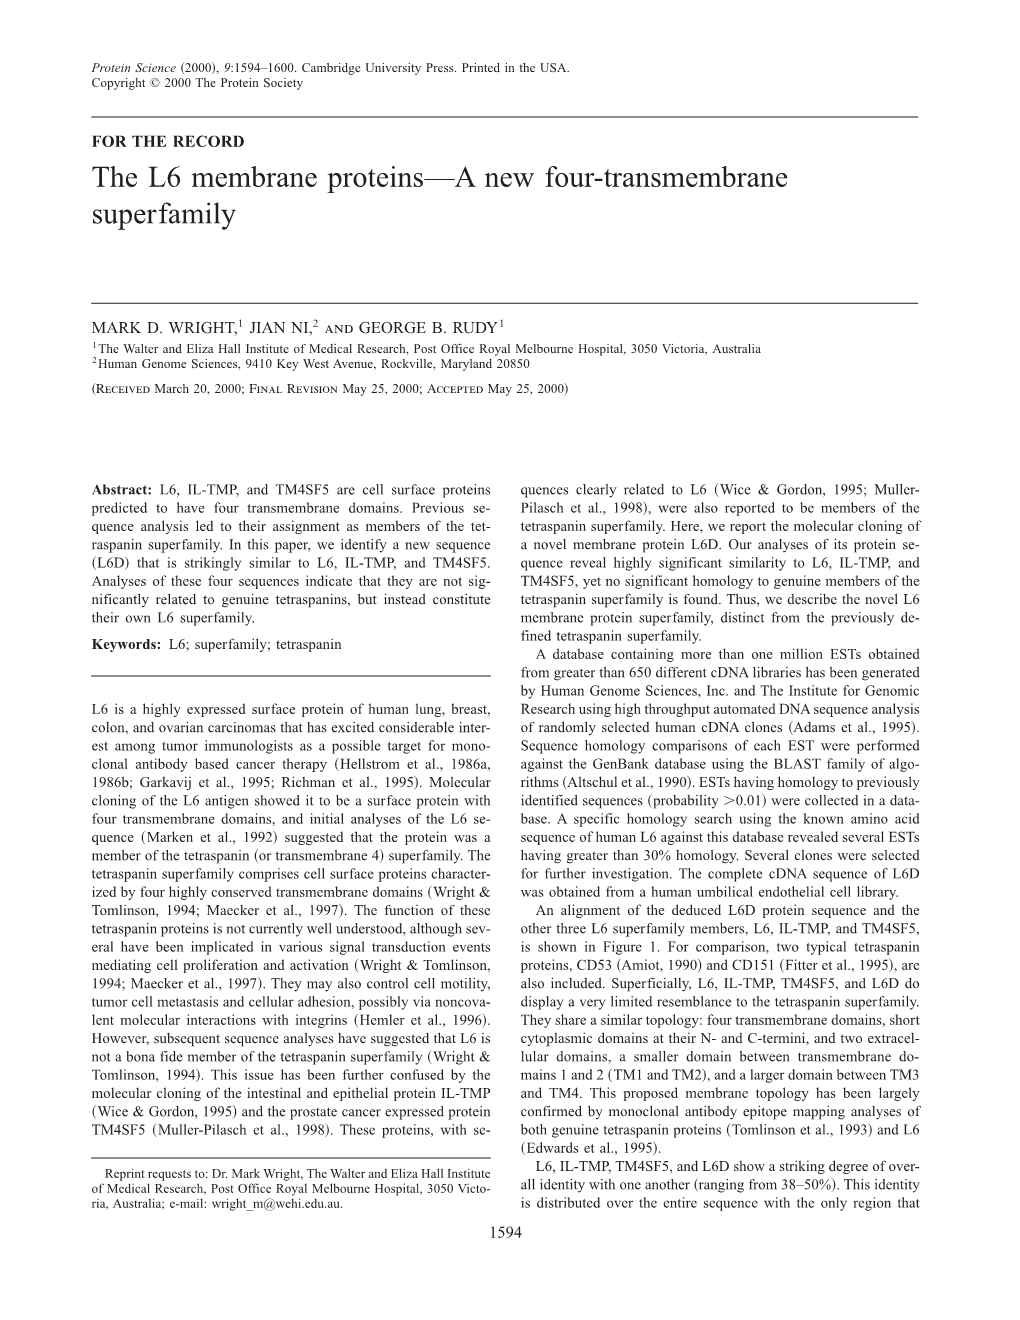 The L6 Membrane Proteins—A New Four-Transmembrane Superfamily